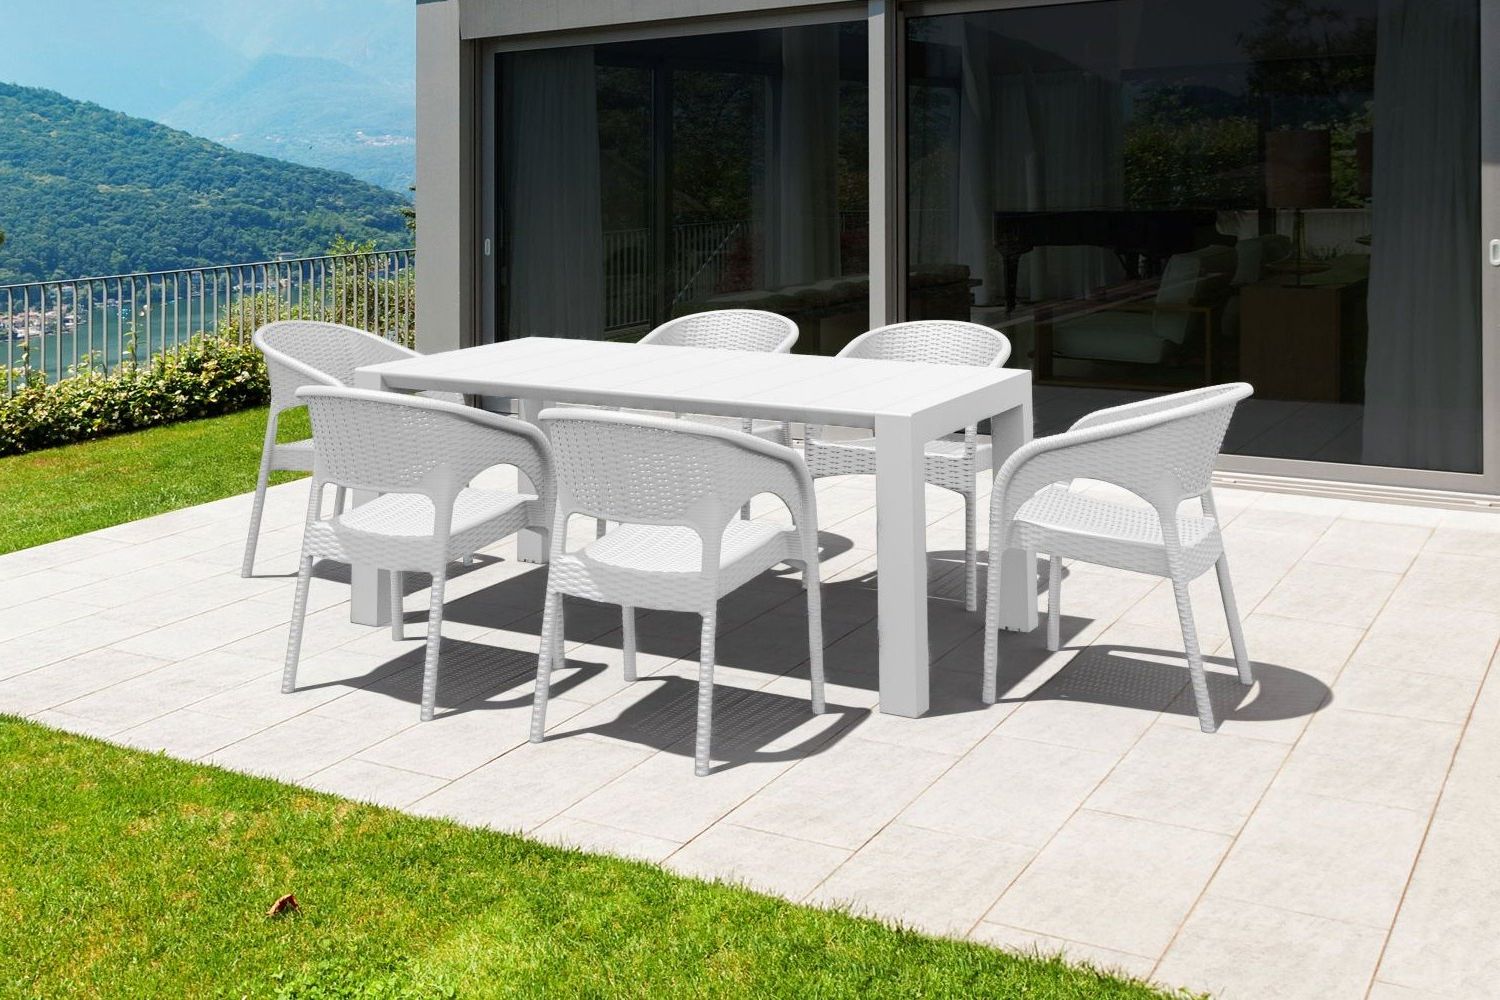 Extendable Patio Dining Set For Most Recent Panama Extendable Patio Dining Set 7 Piece White Isp8082s Whsiesta (View 6 of 15)